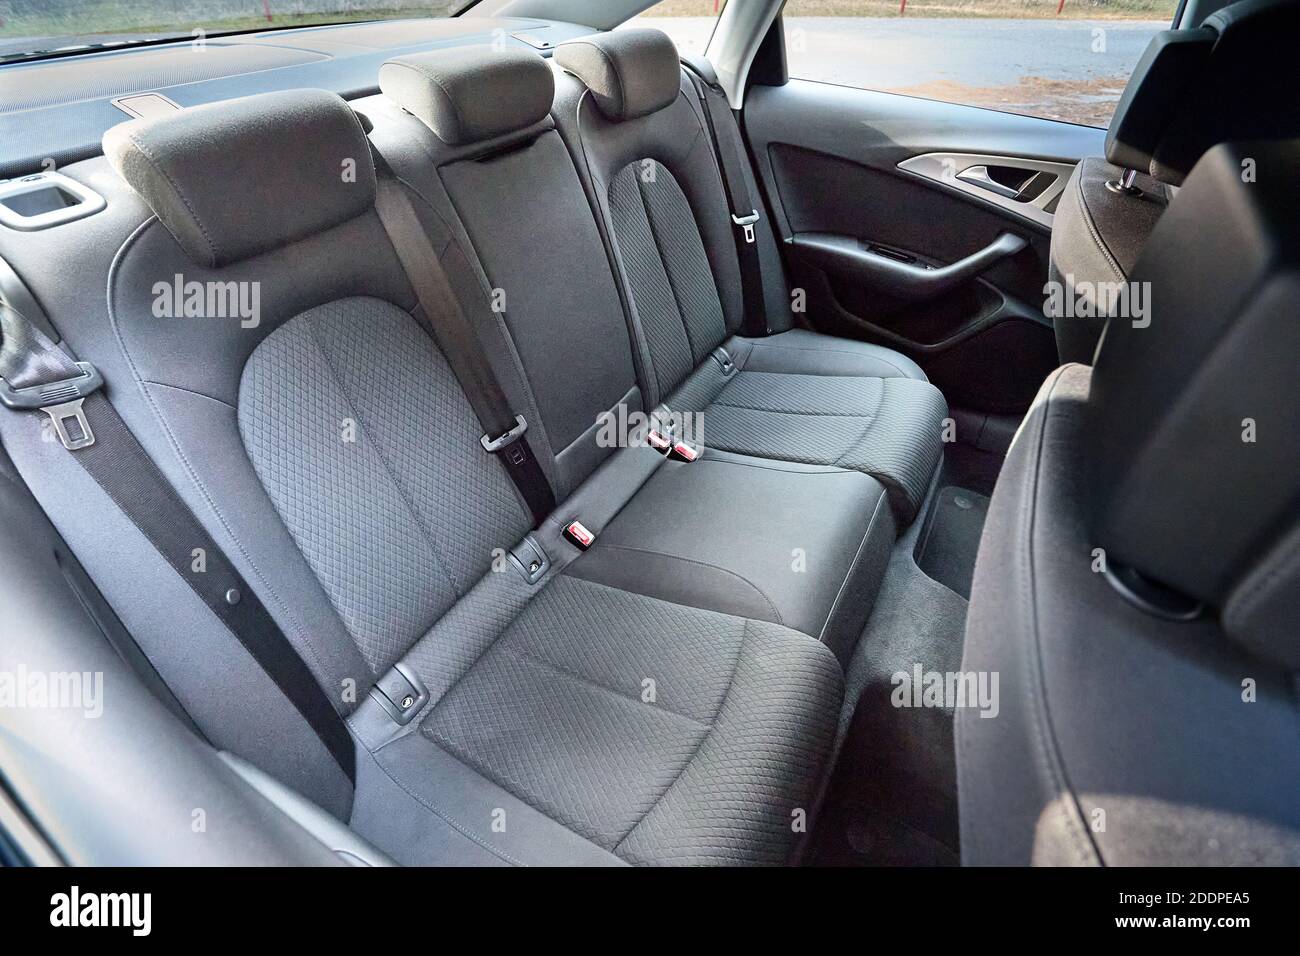 GRODNO, BELARUS - DECEMBER 2019: Audi A6 4G C7 contemporary car cabin interior with rear back passenger textile seats with headrests and safety belts Stock Photo